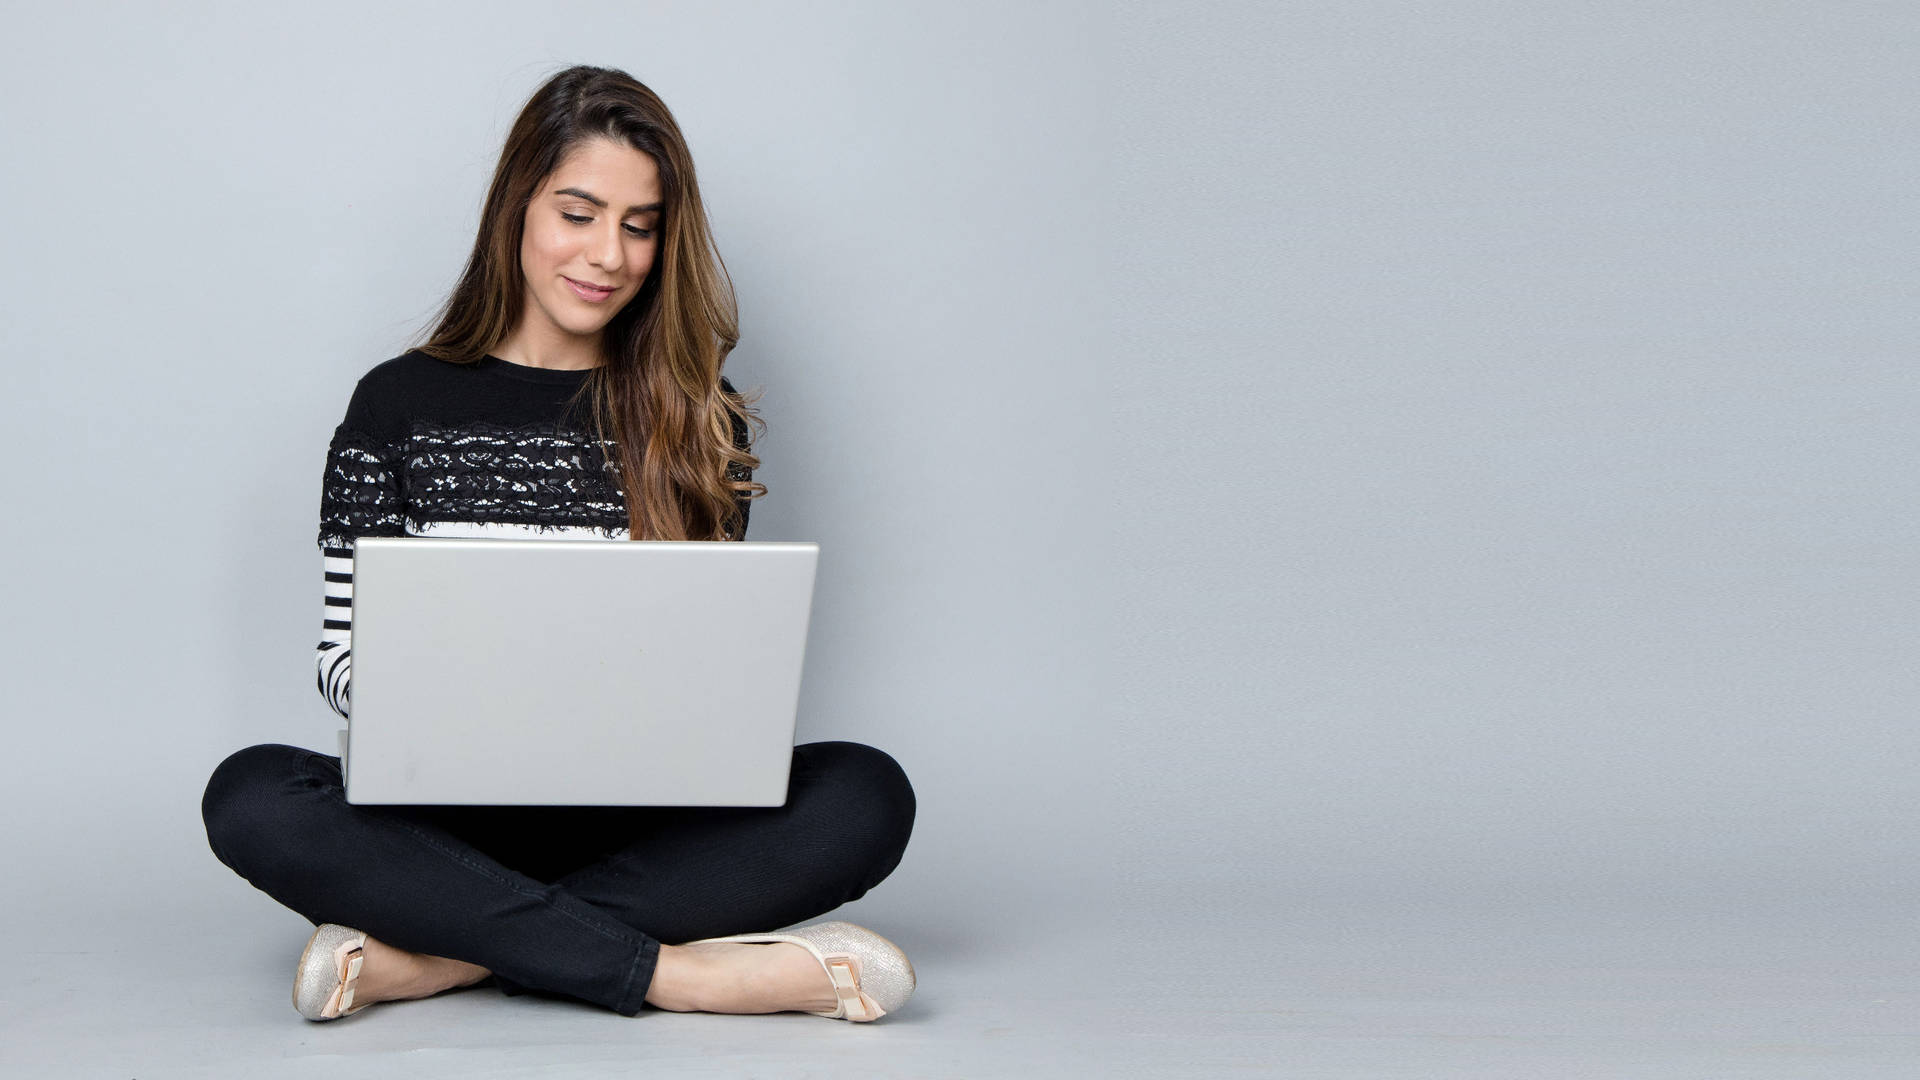 Woman Reading On Laptop Background